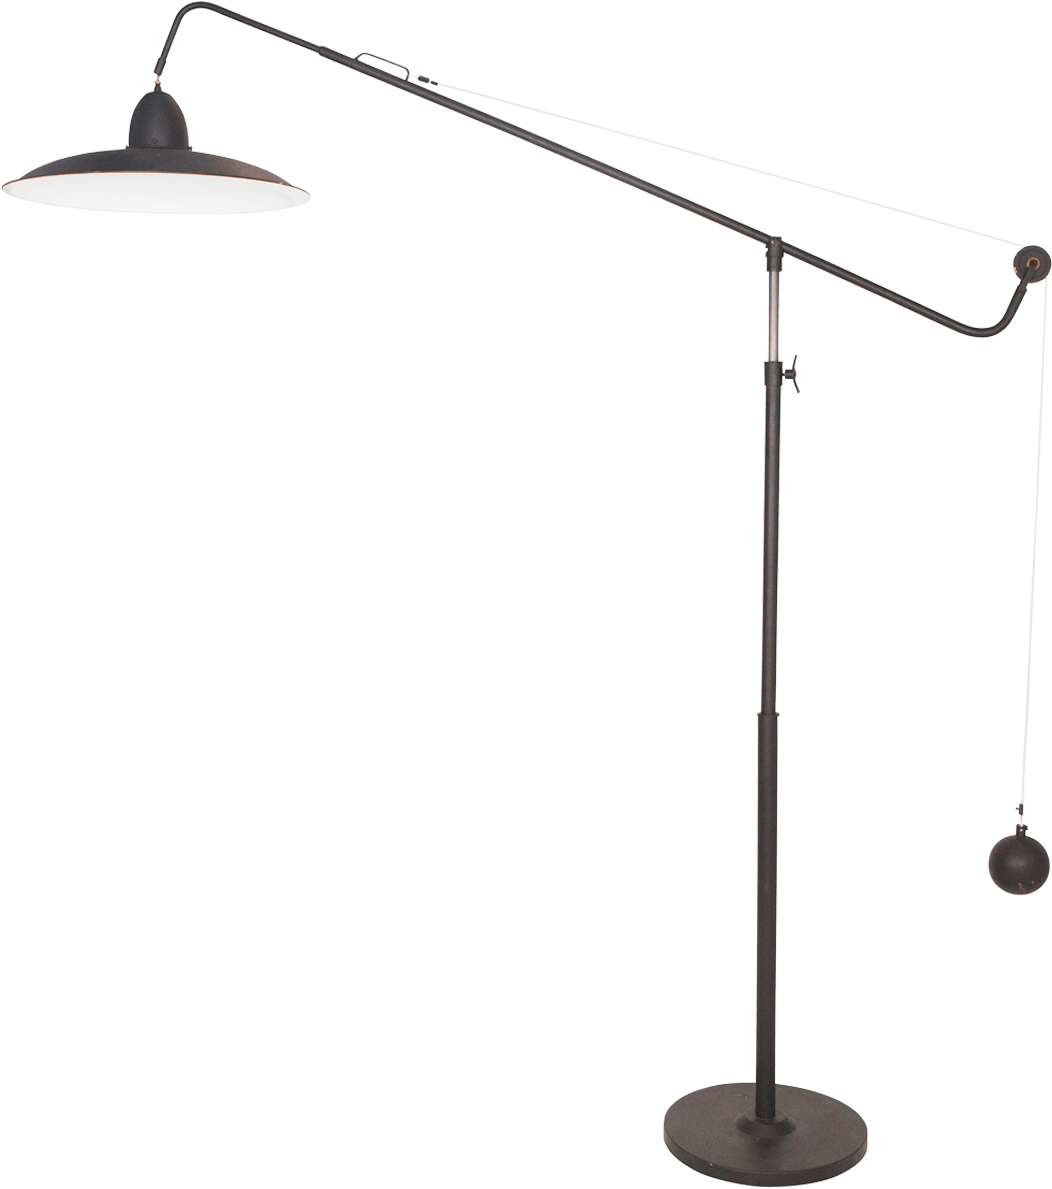 Objects Lamp Hood Bulb Blinking PNG